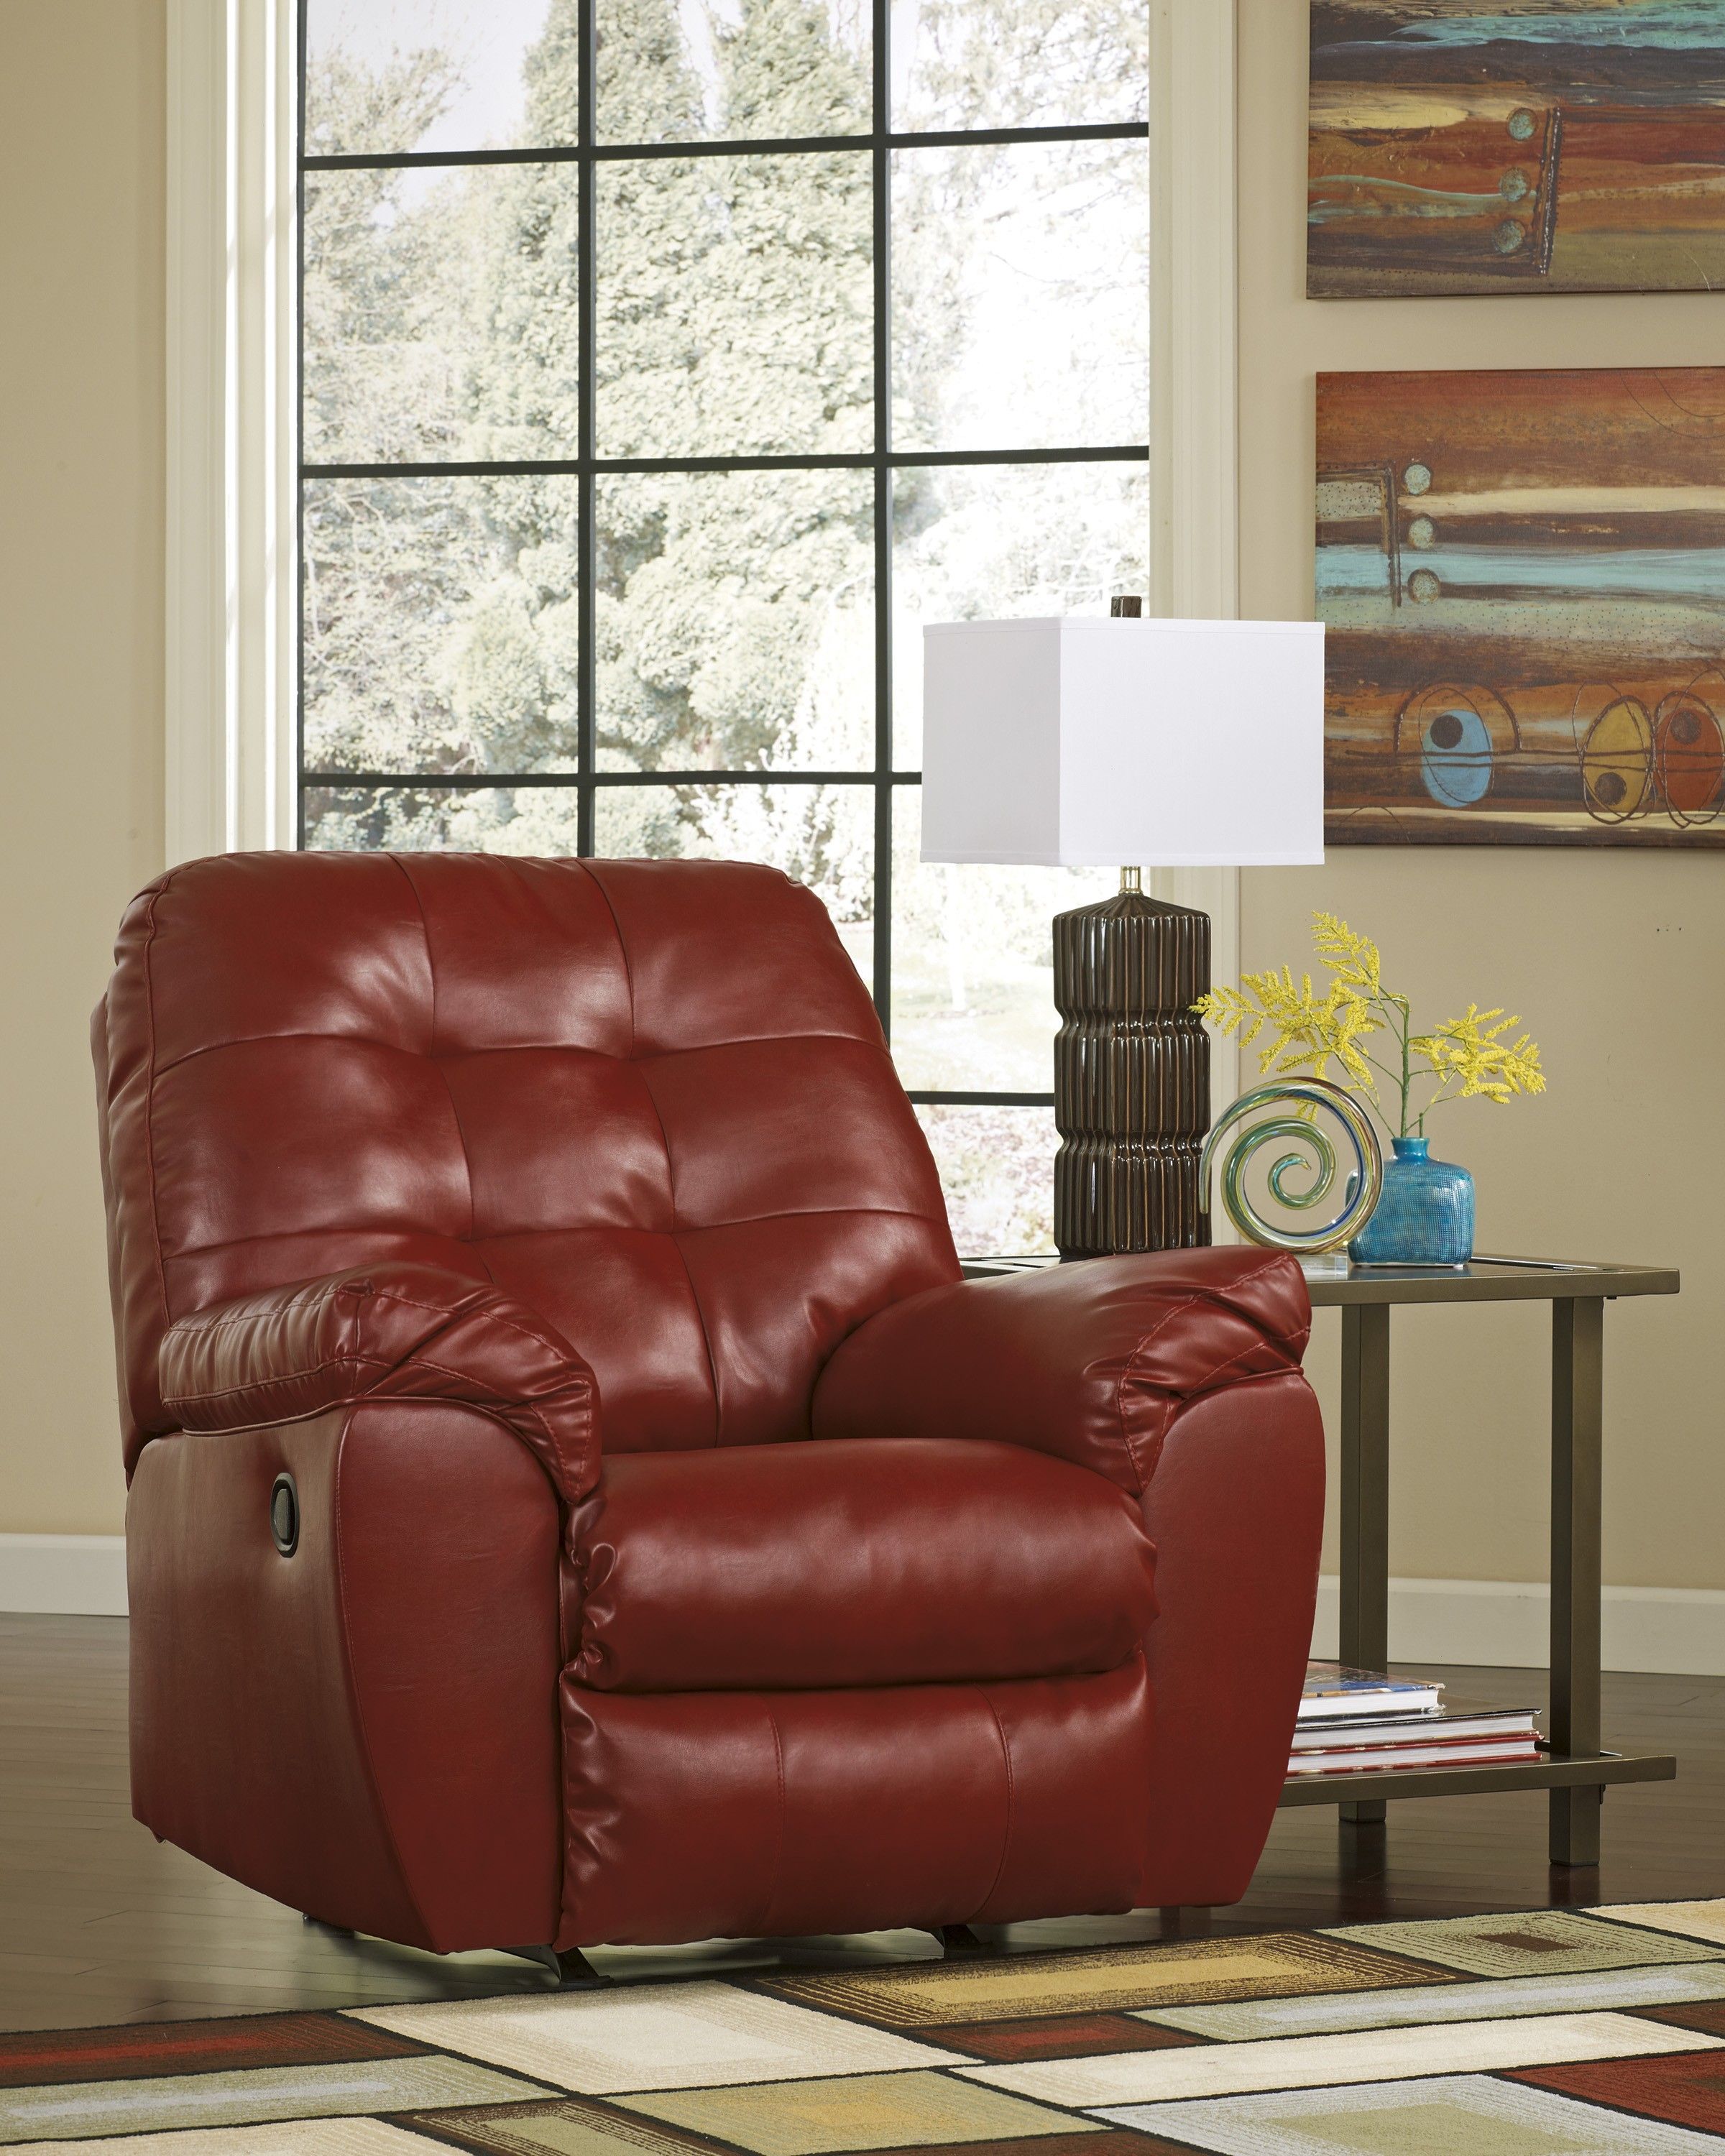 Leon Furniture | Buy Living Rooms Recliners Online, Phoenix For Hercules Oyster Swivel Glider Recliners (View 13 of 25)